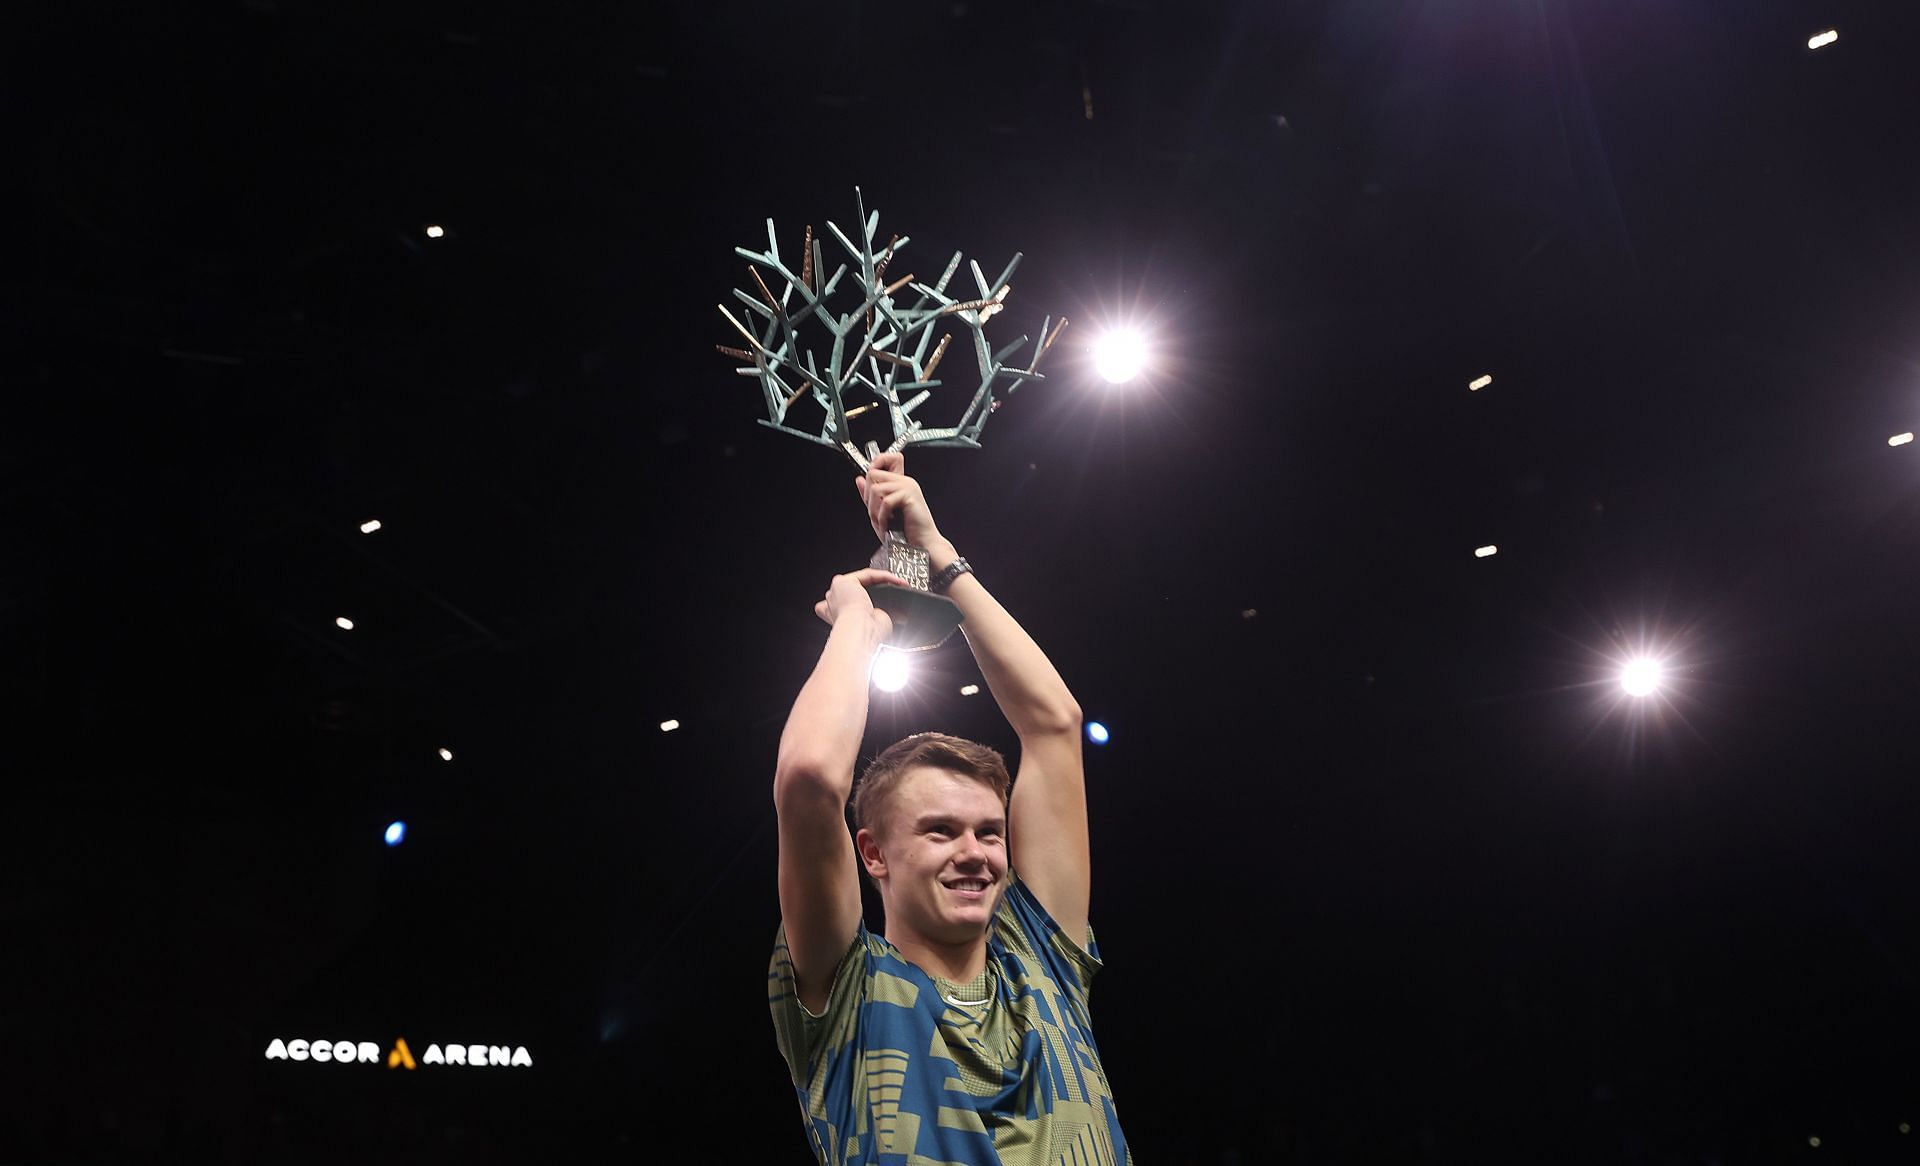 Holger Rune upon clinching the title at the Paris Masters